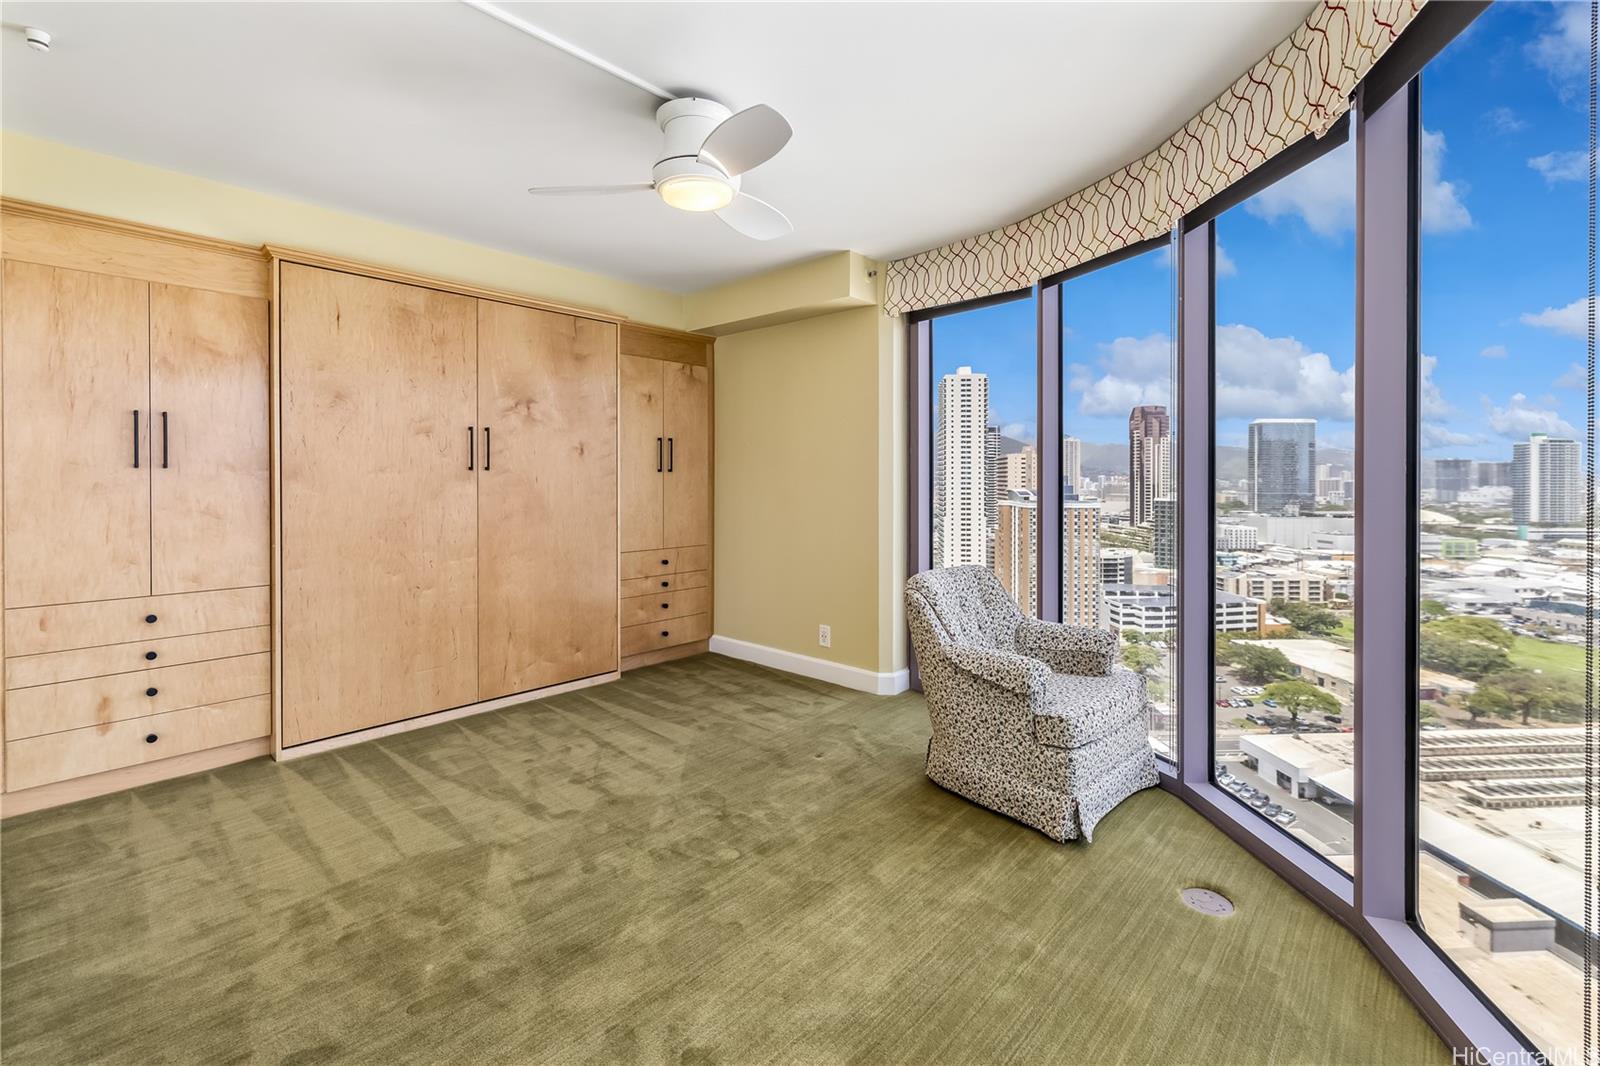 One Waterfront Tower 415 South Street  Unit 2301 (Makai Tower)